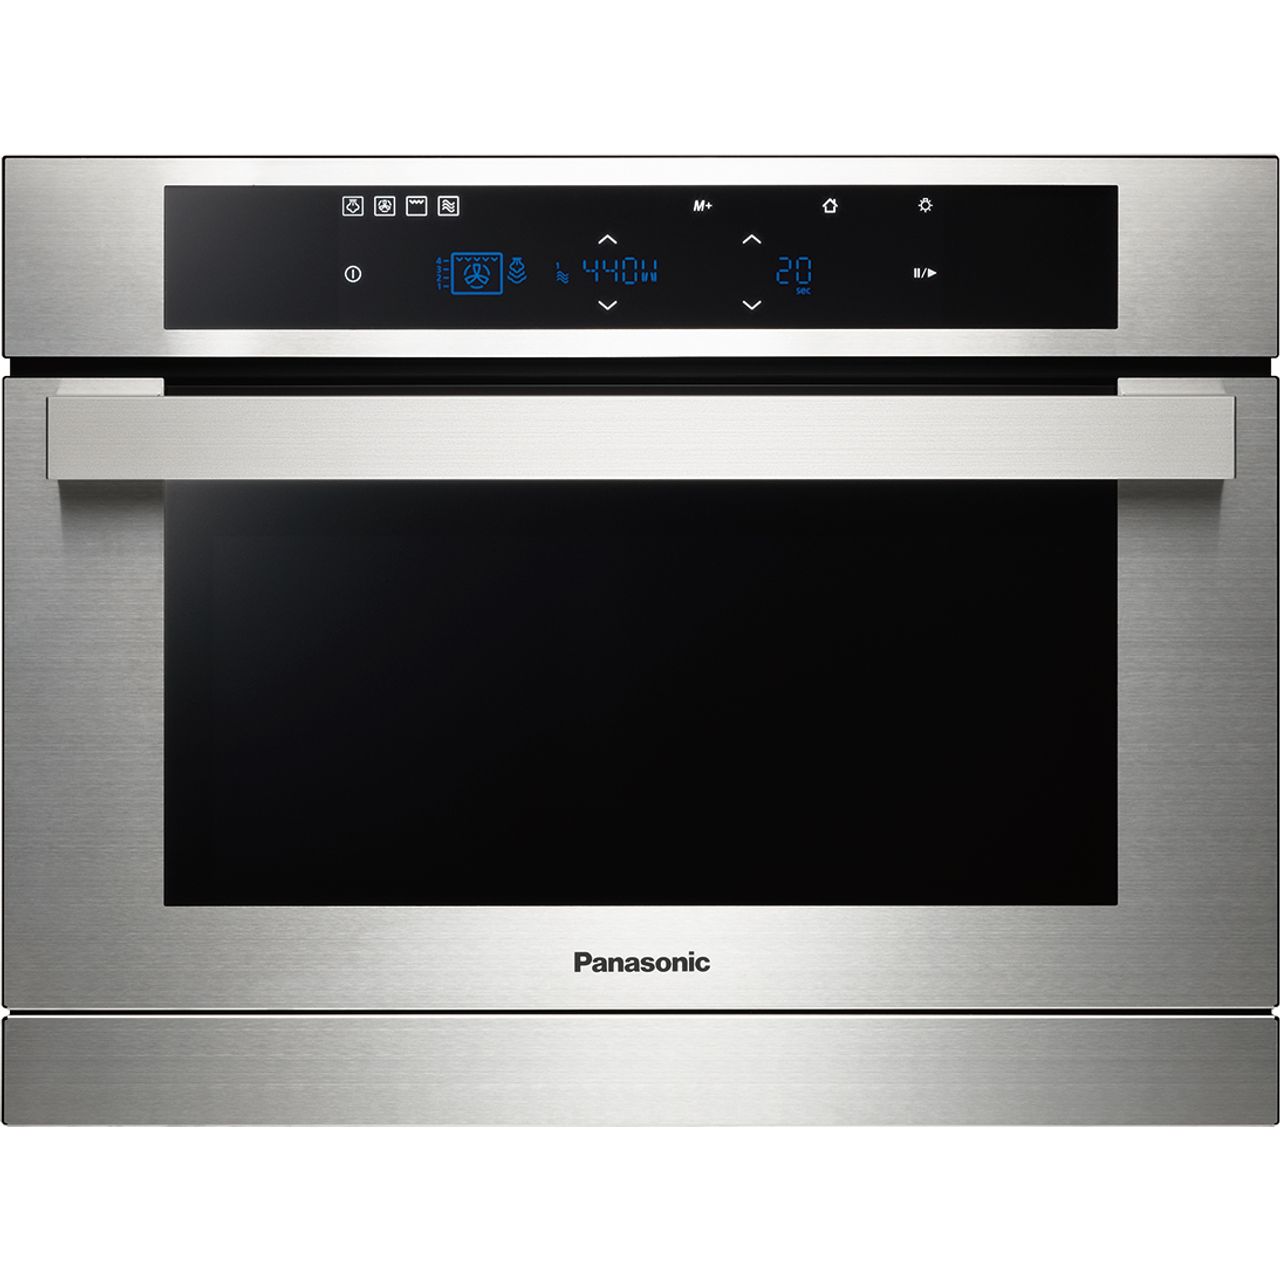 Panasonic HL-SX485SBTQ Built In Combination Microwave Oven Review